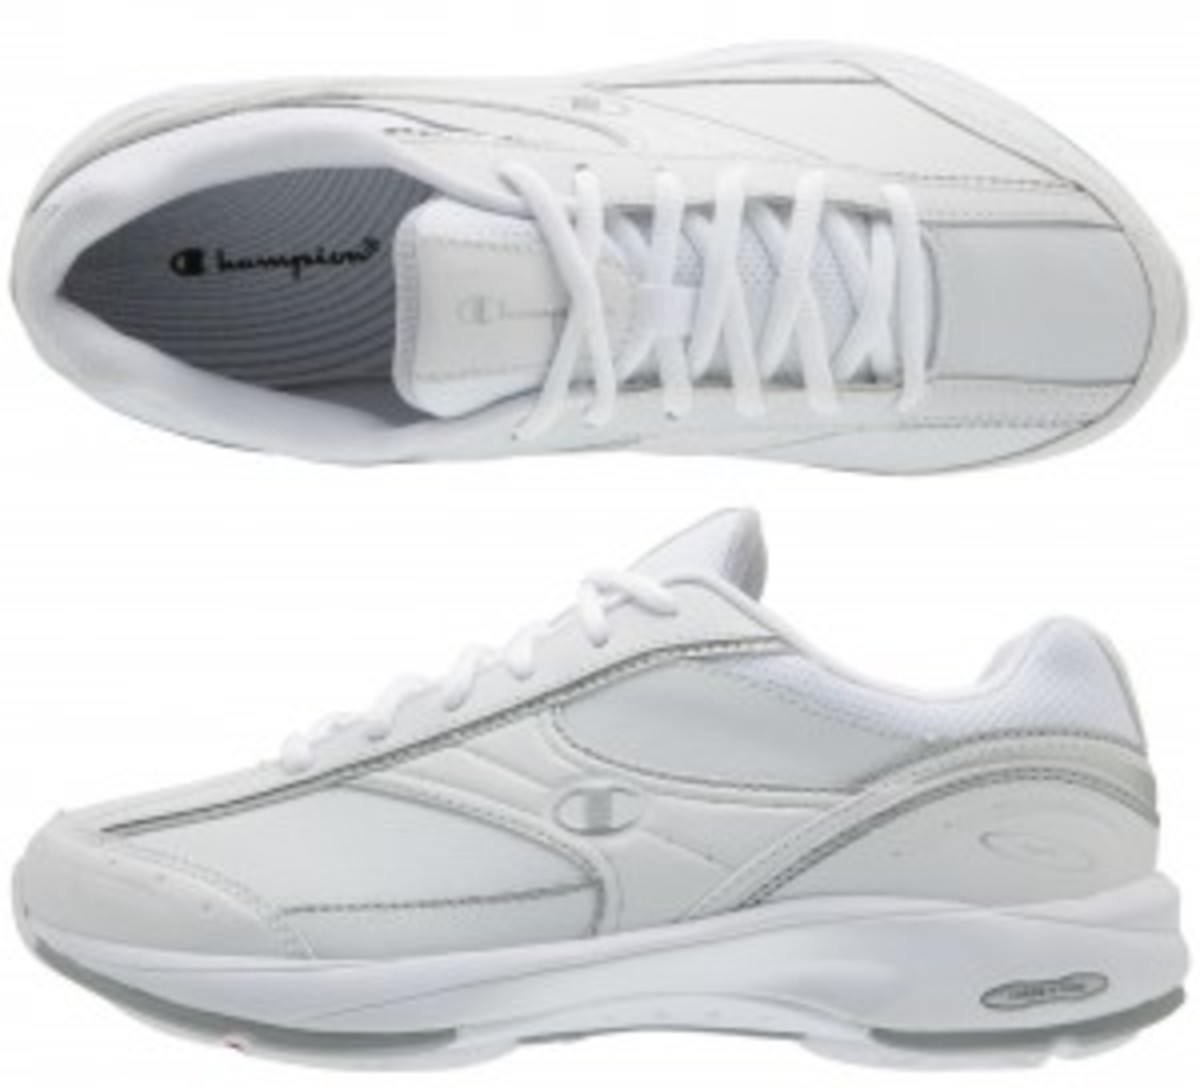 white champion shoes payless